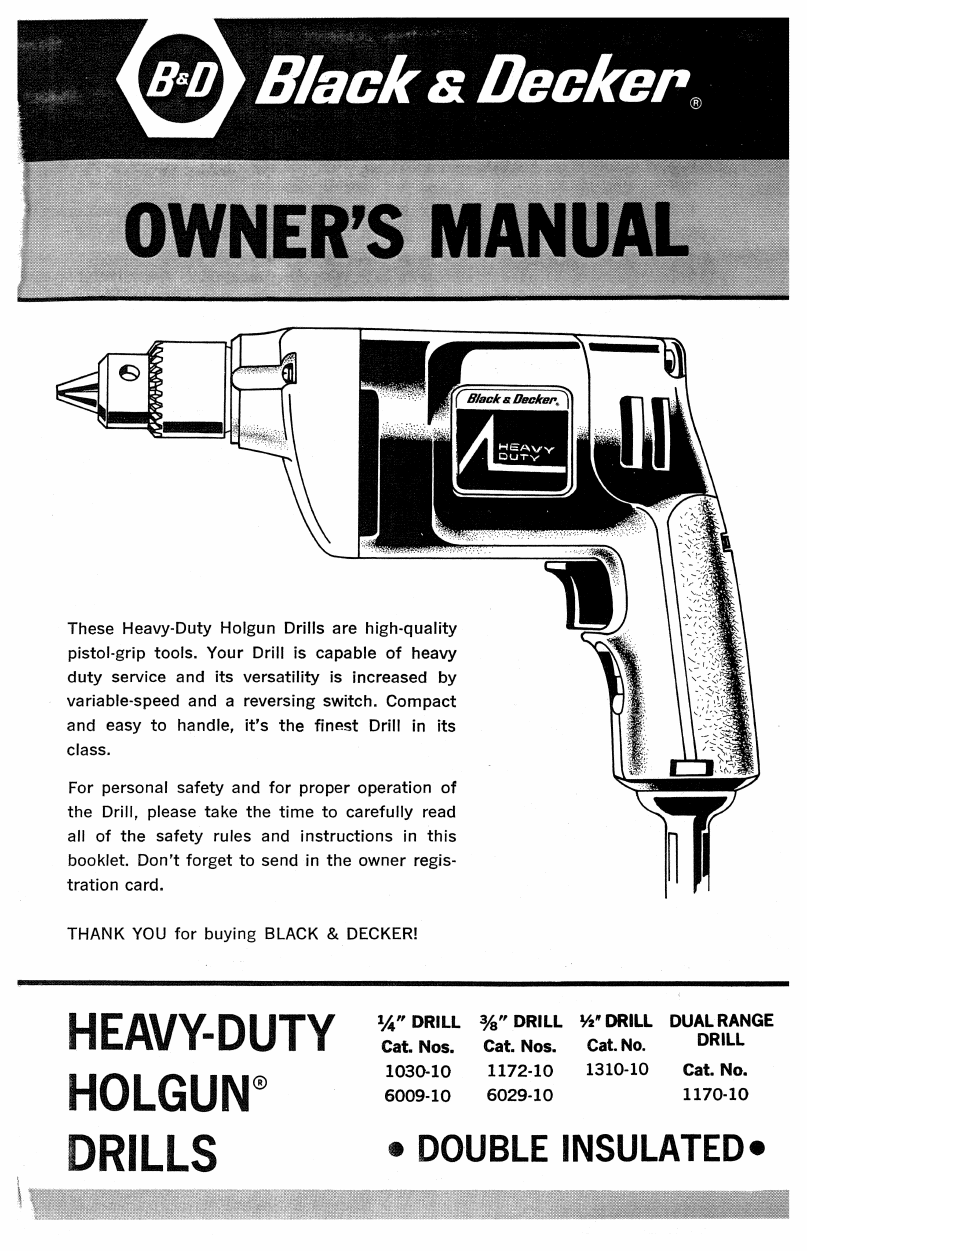 Black and decker drill user manual download